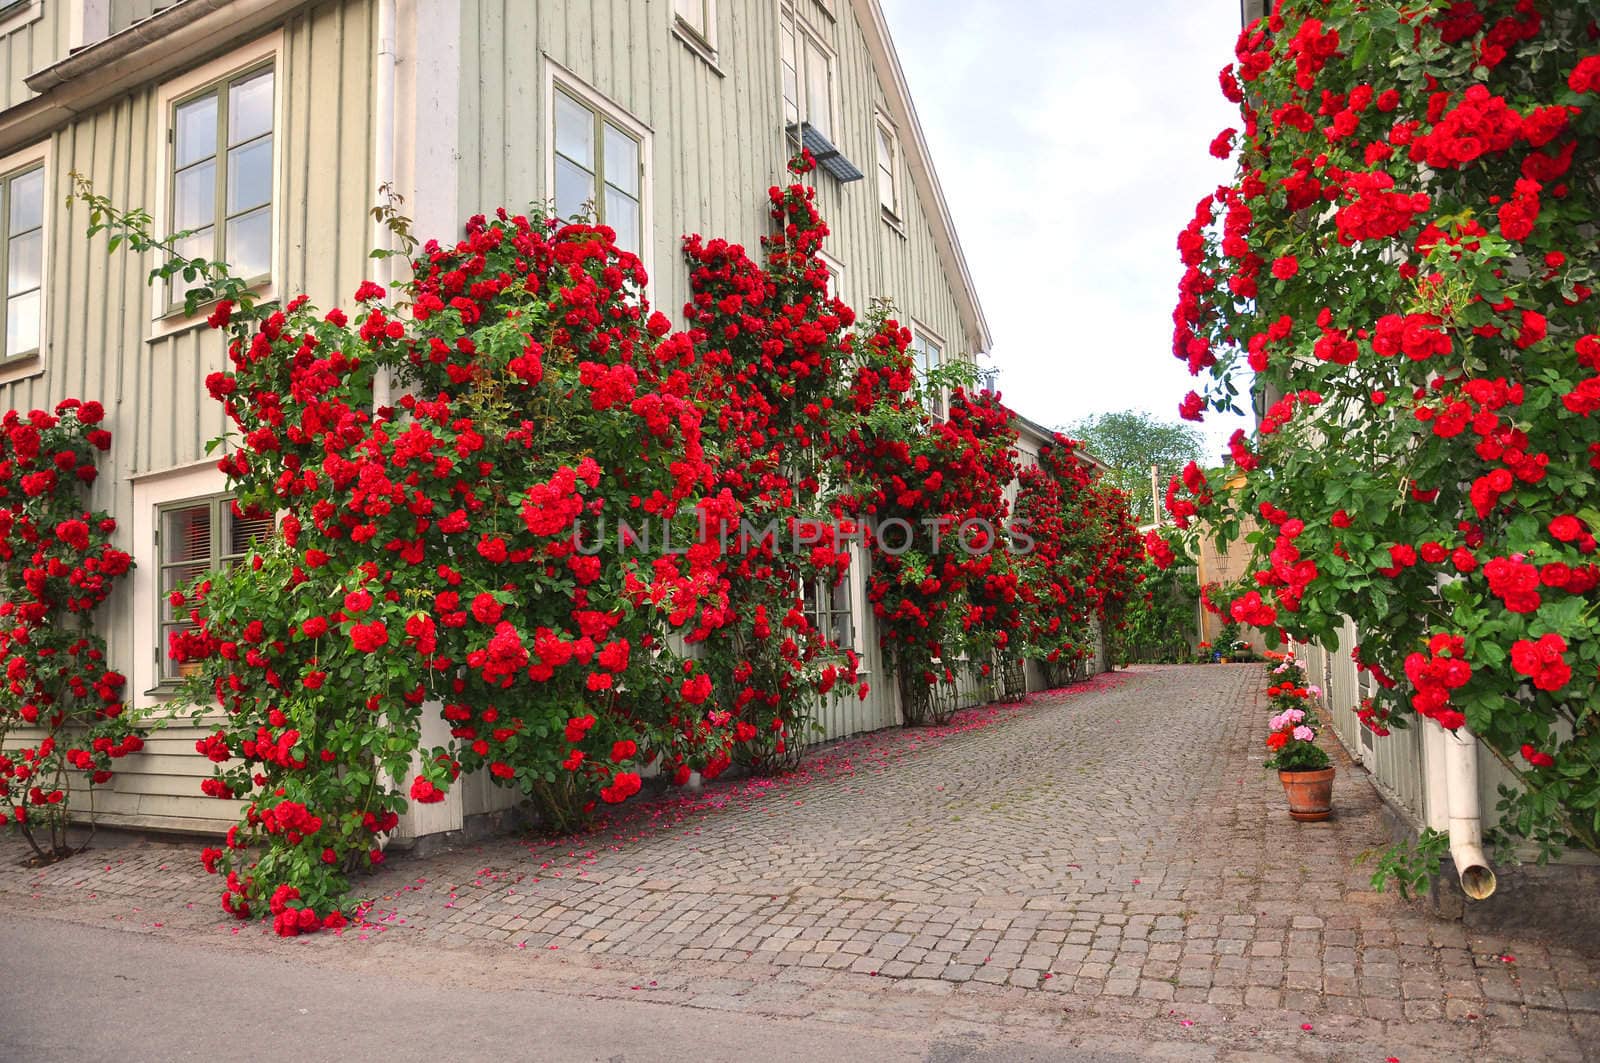 Alley of roses by ankihoglund